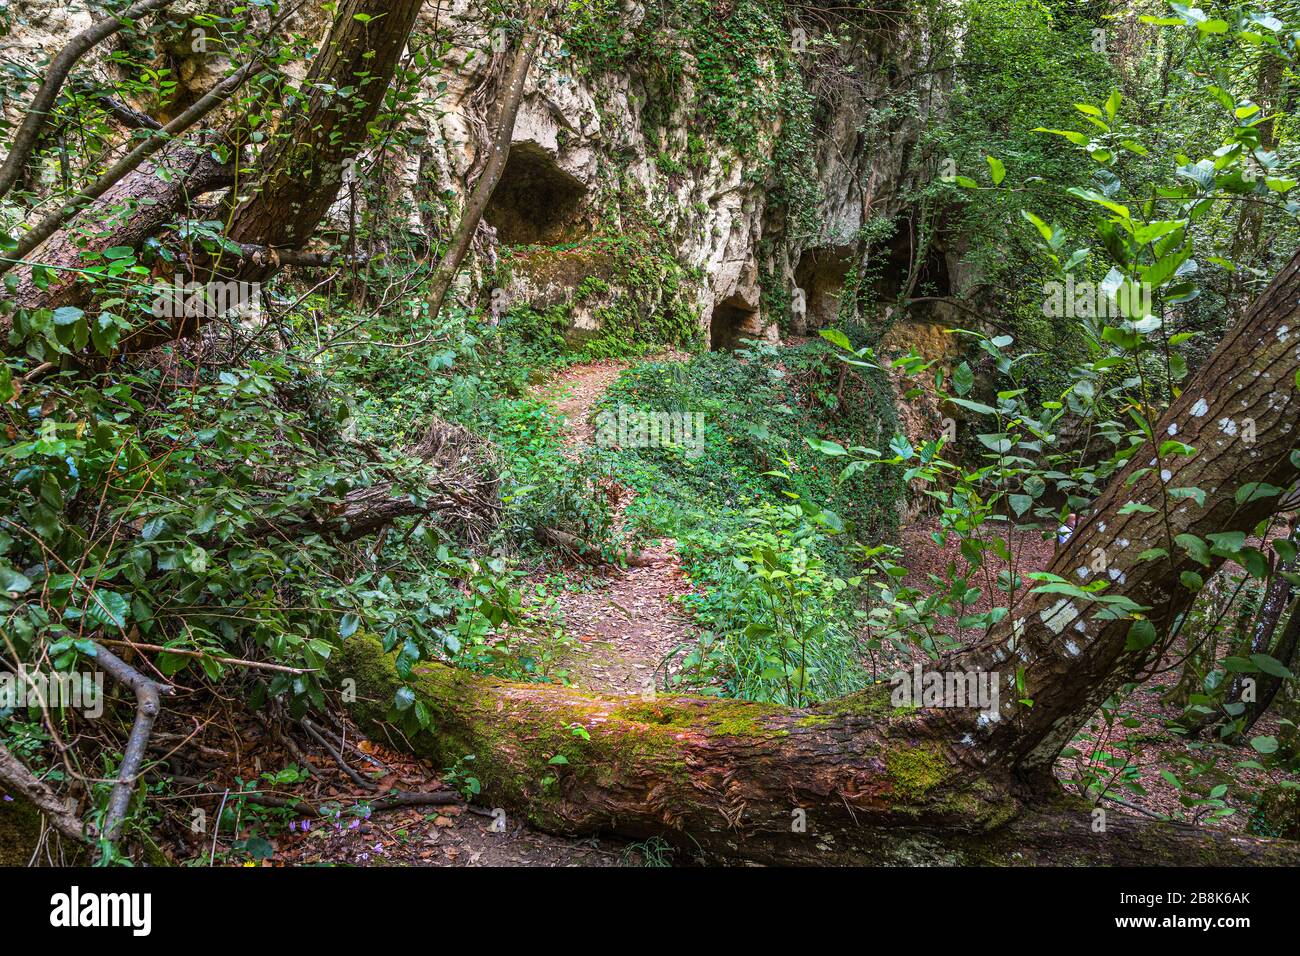 medieval rock tombs in Alento Valley Stock Photo